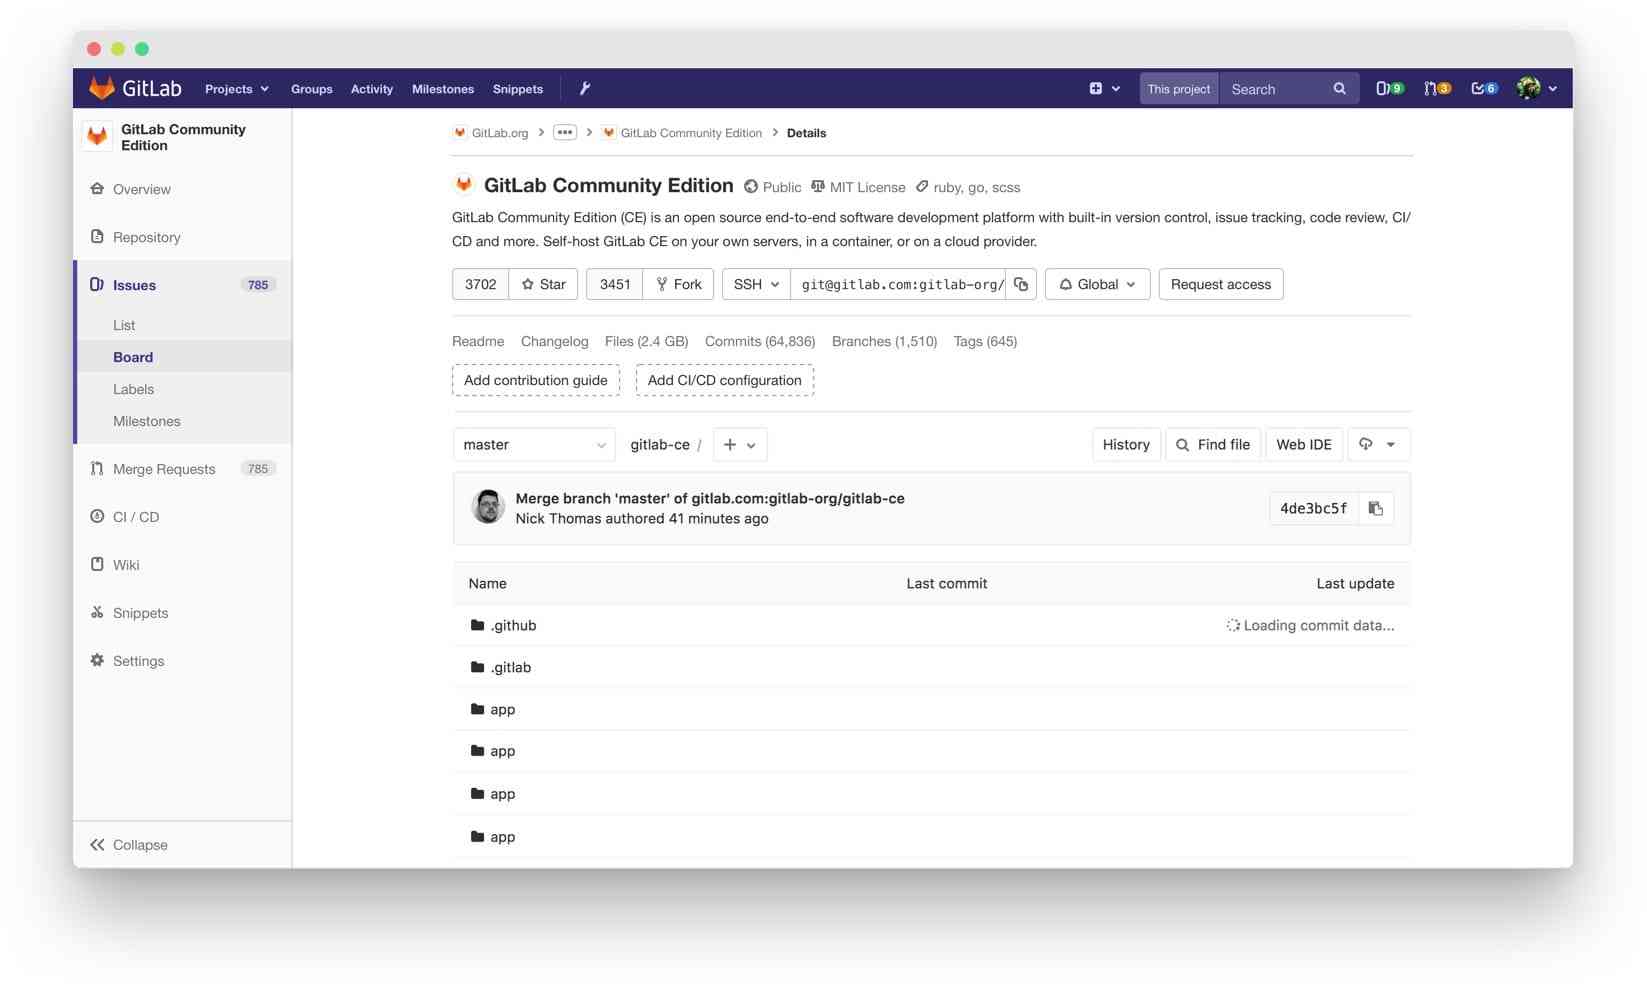 GitLab's project overview before the most recent redesign